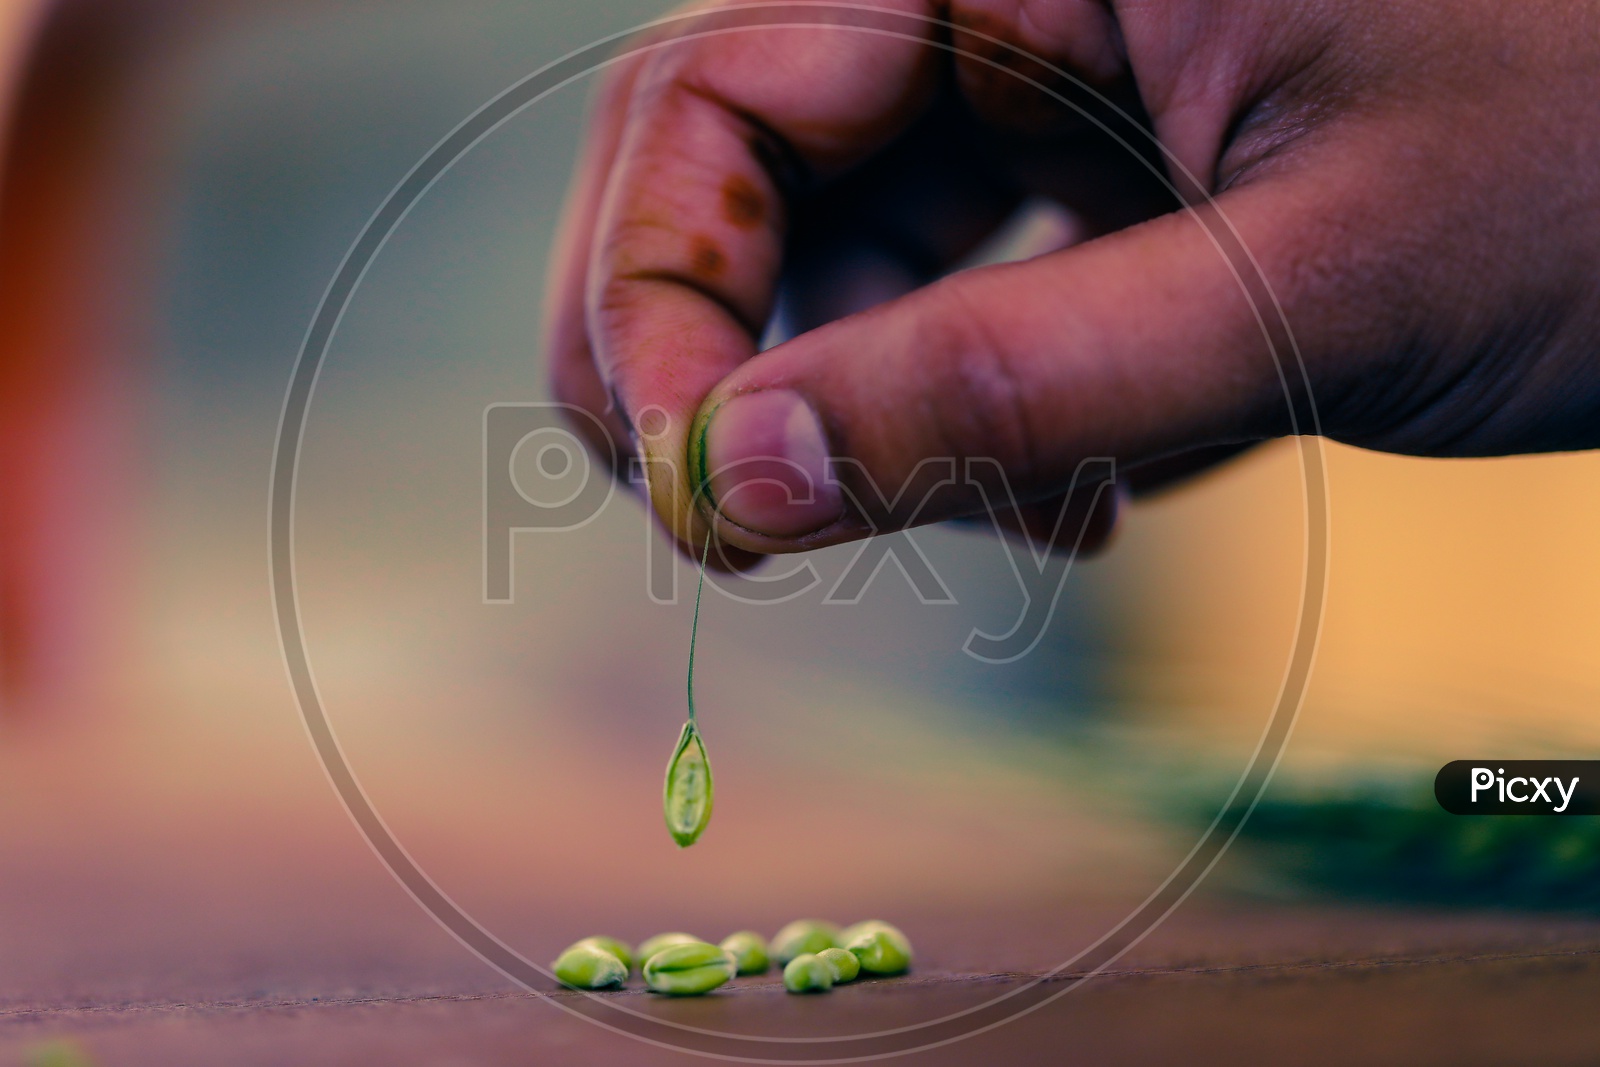 A Hand Picking Fresh Green Wheat Grains on a Wooden Table Background